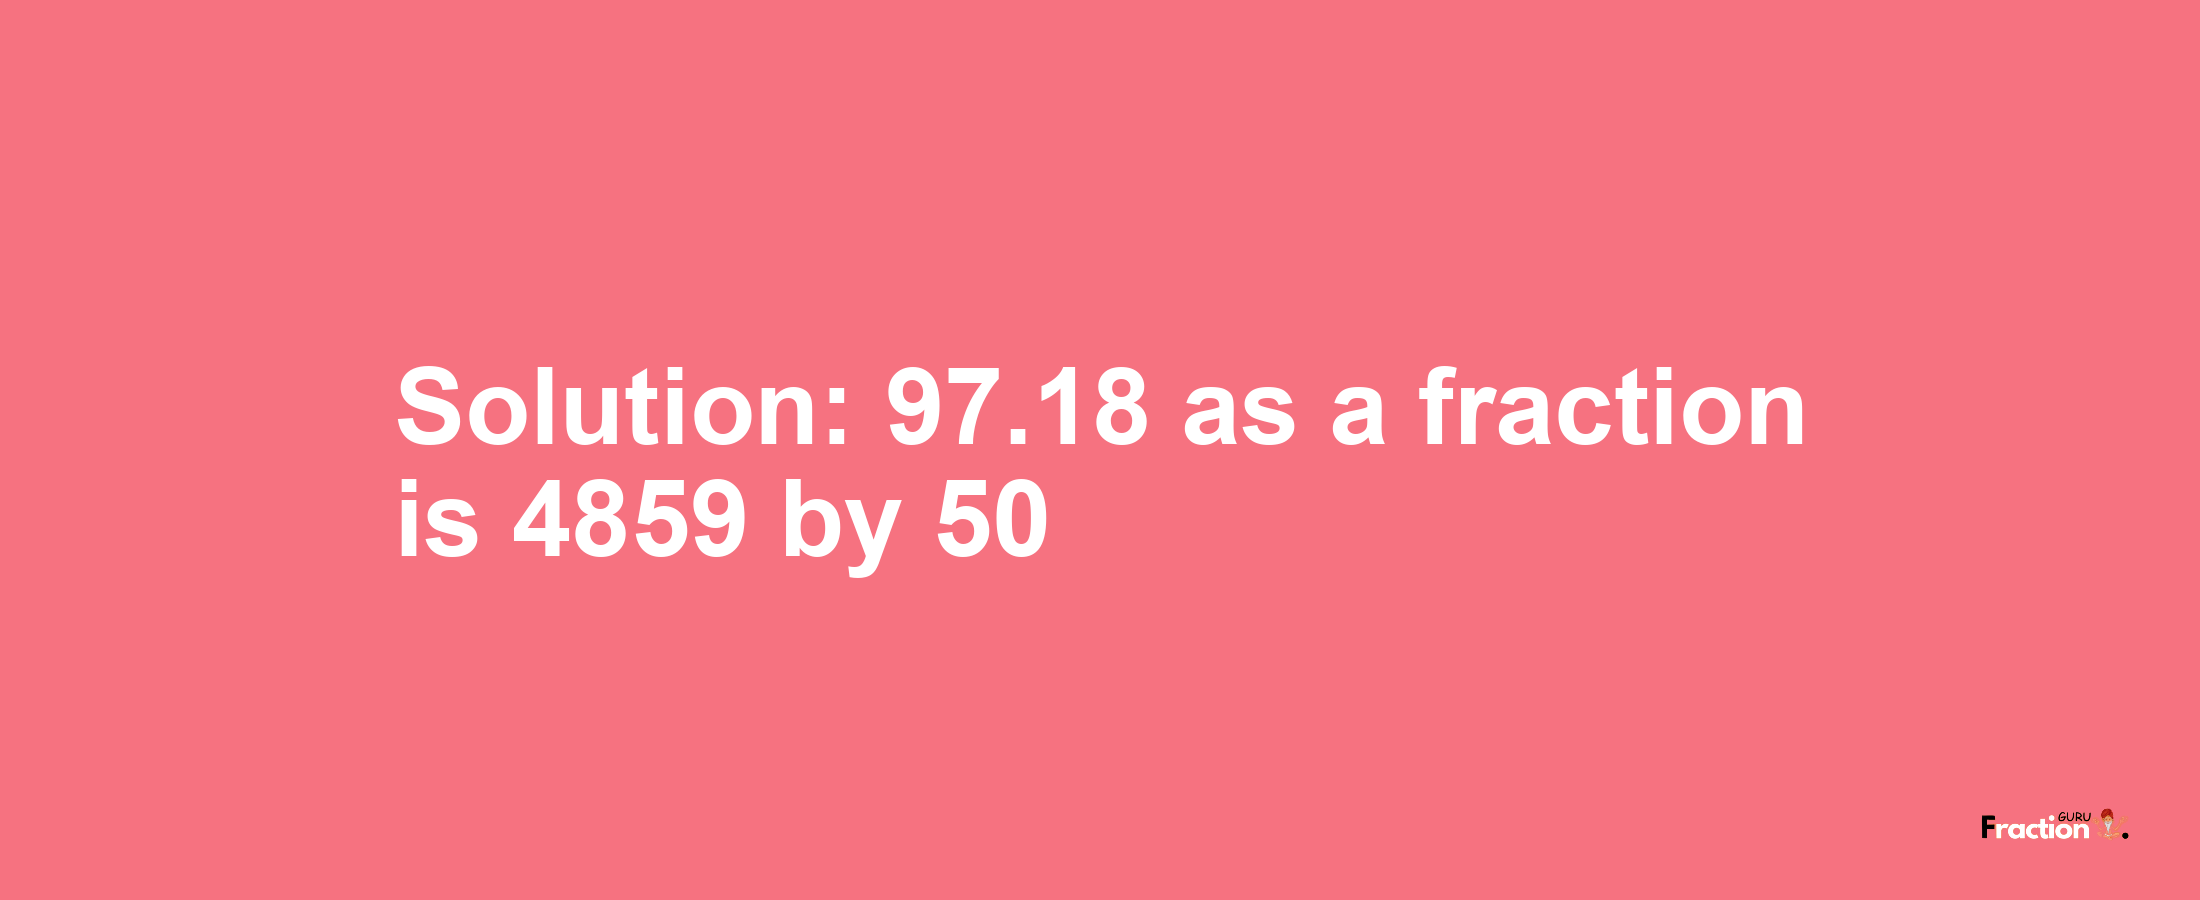 Solution:97.18 as a fraction is 4859/50